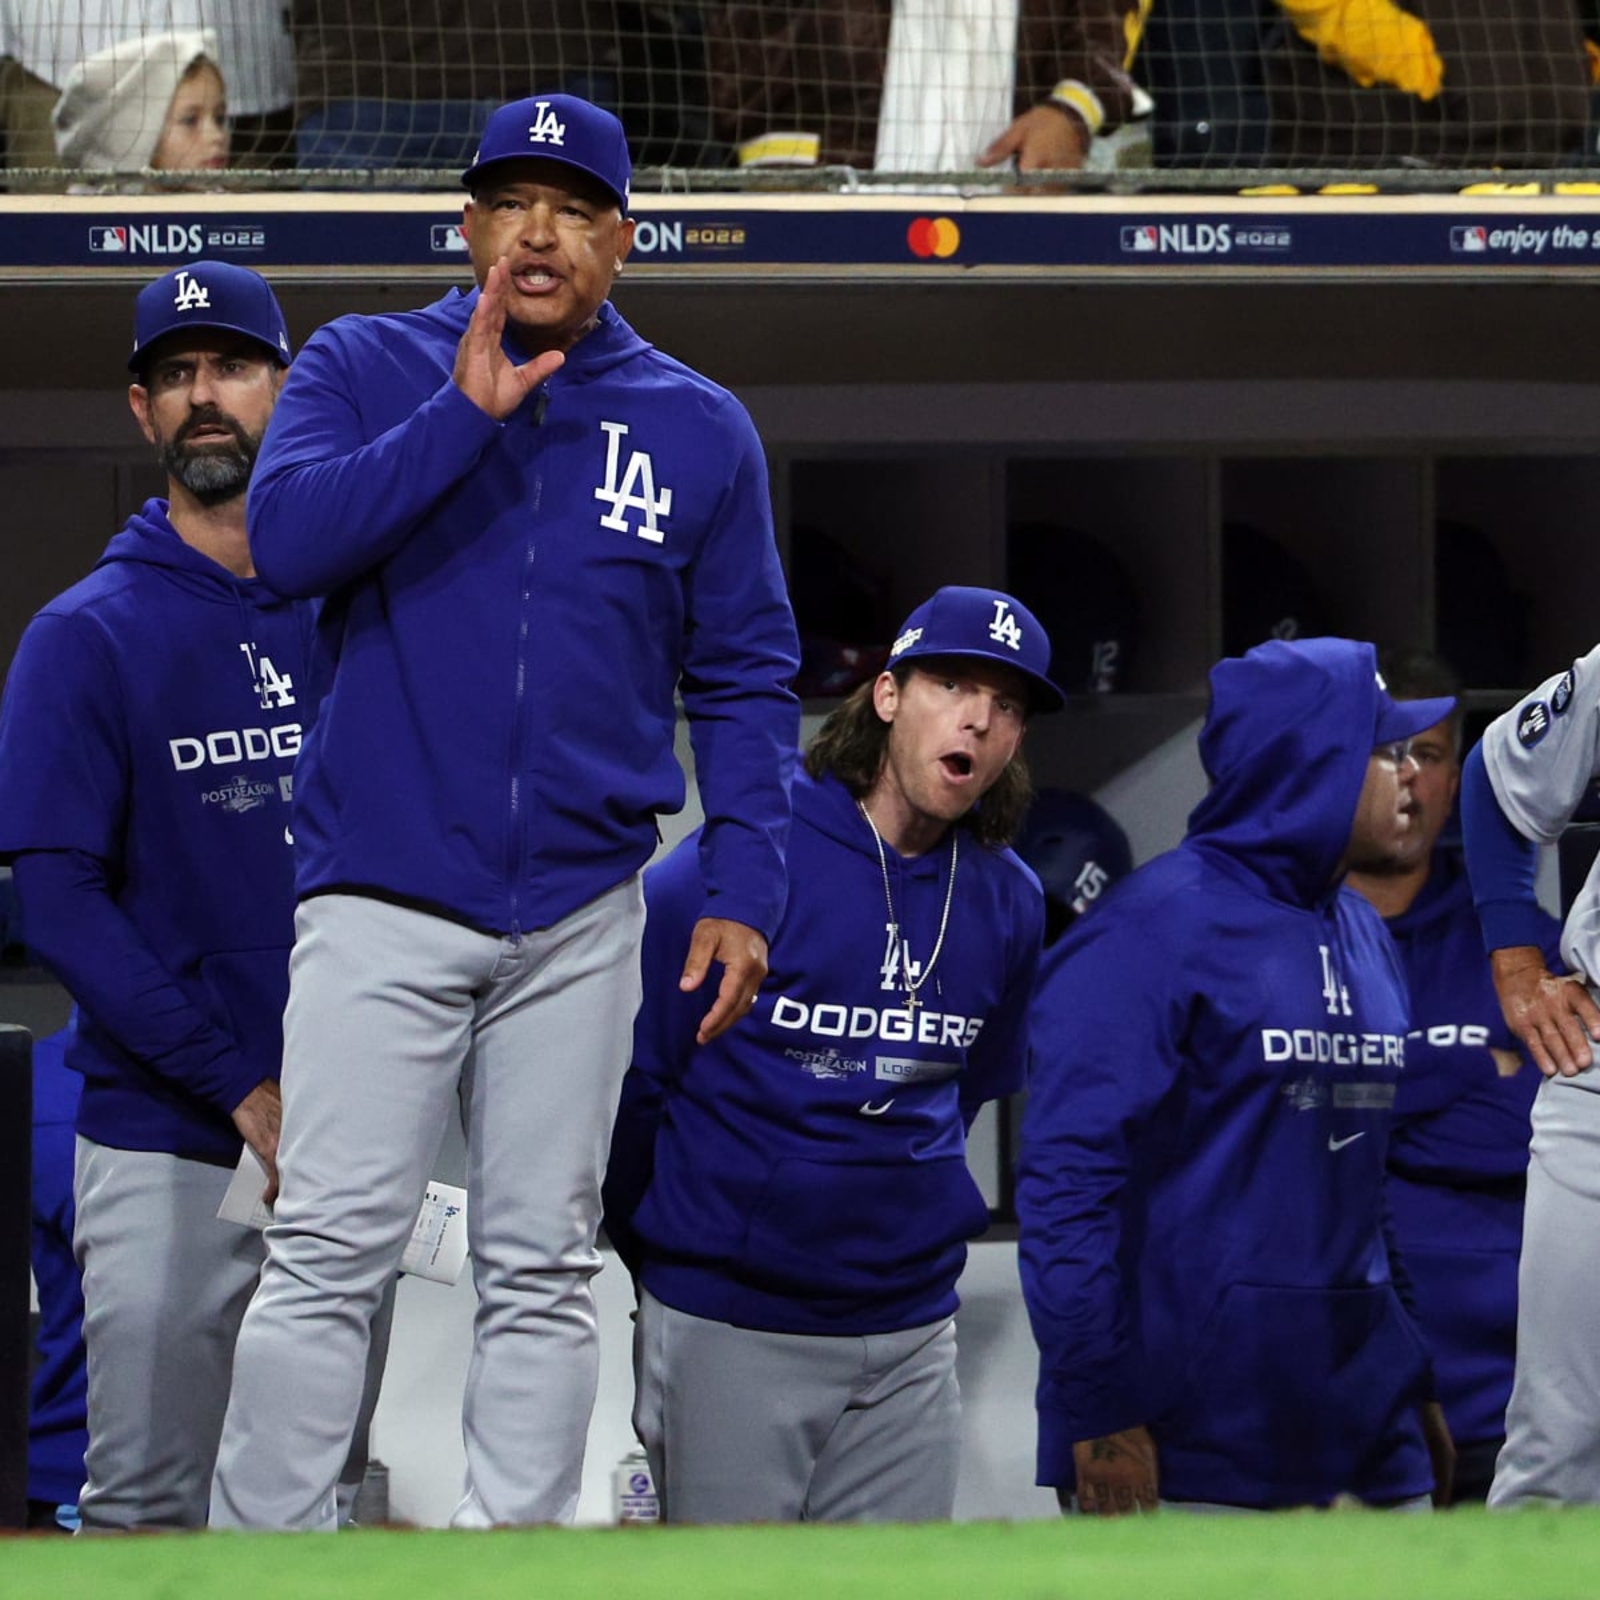 Dodgers Dugout: Is this the Dodgers' worst pitching team ever? Yes